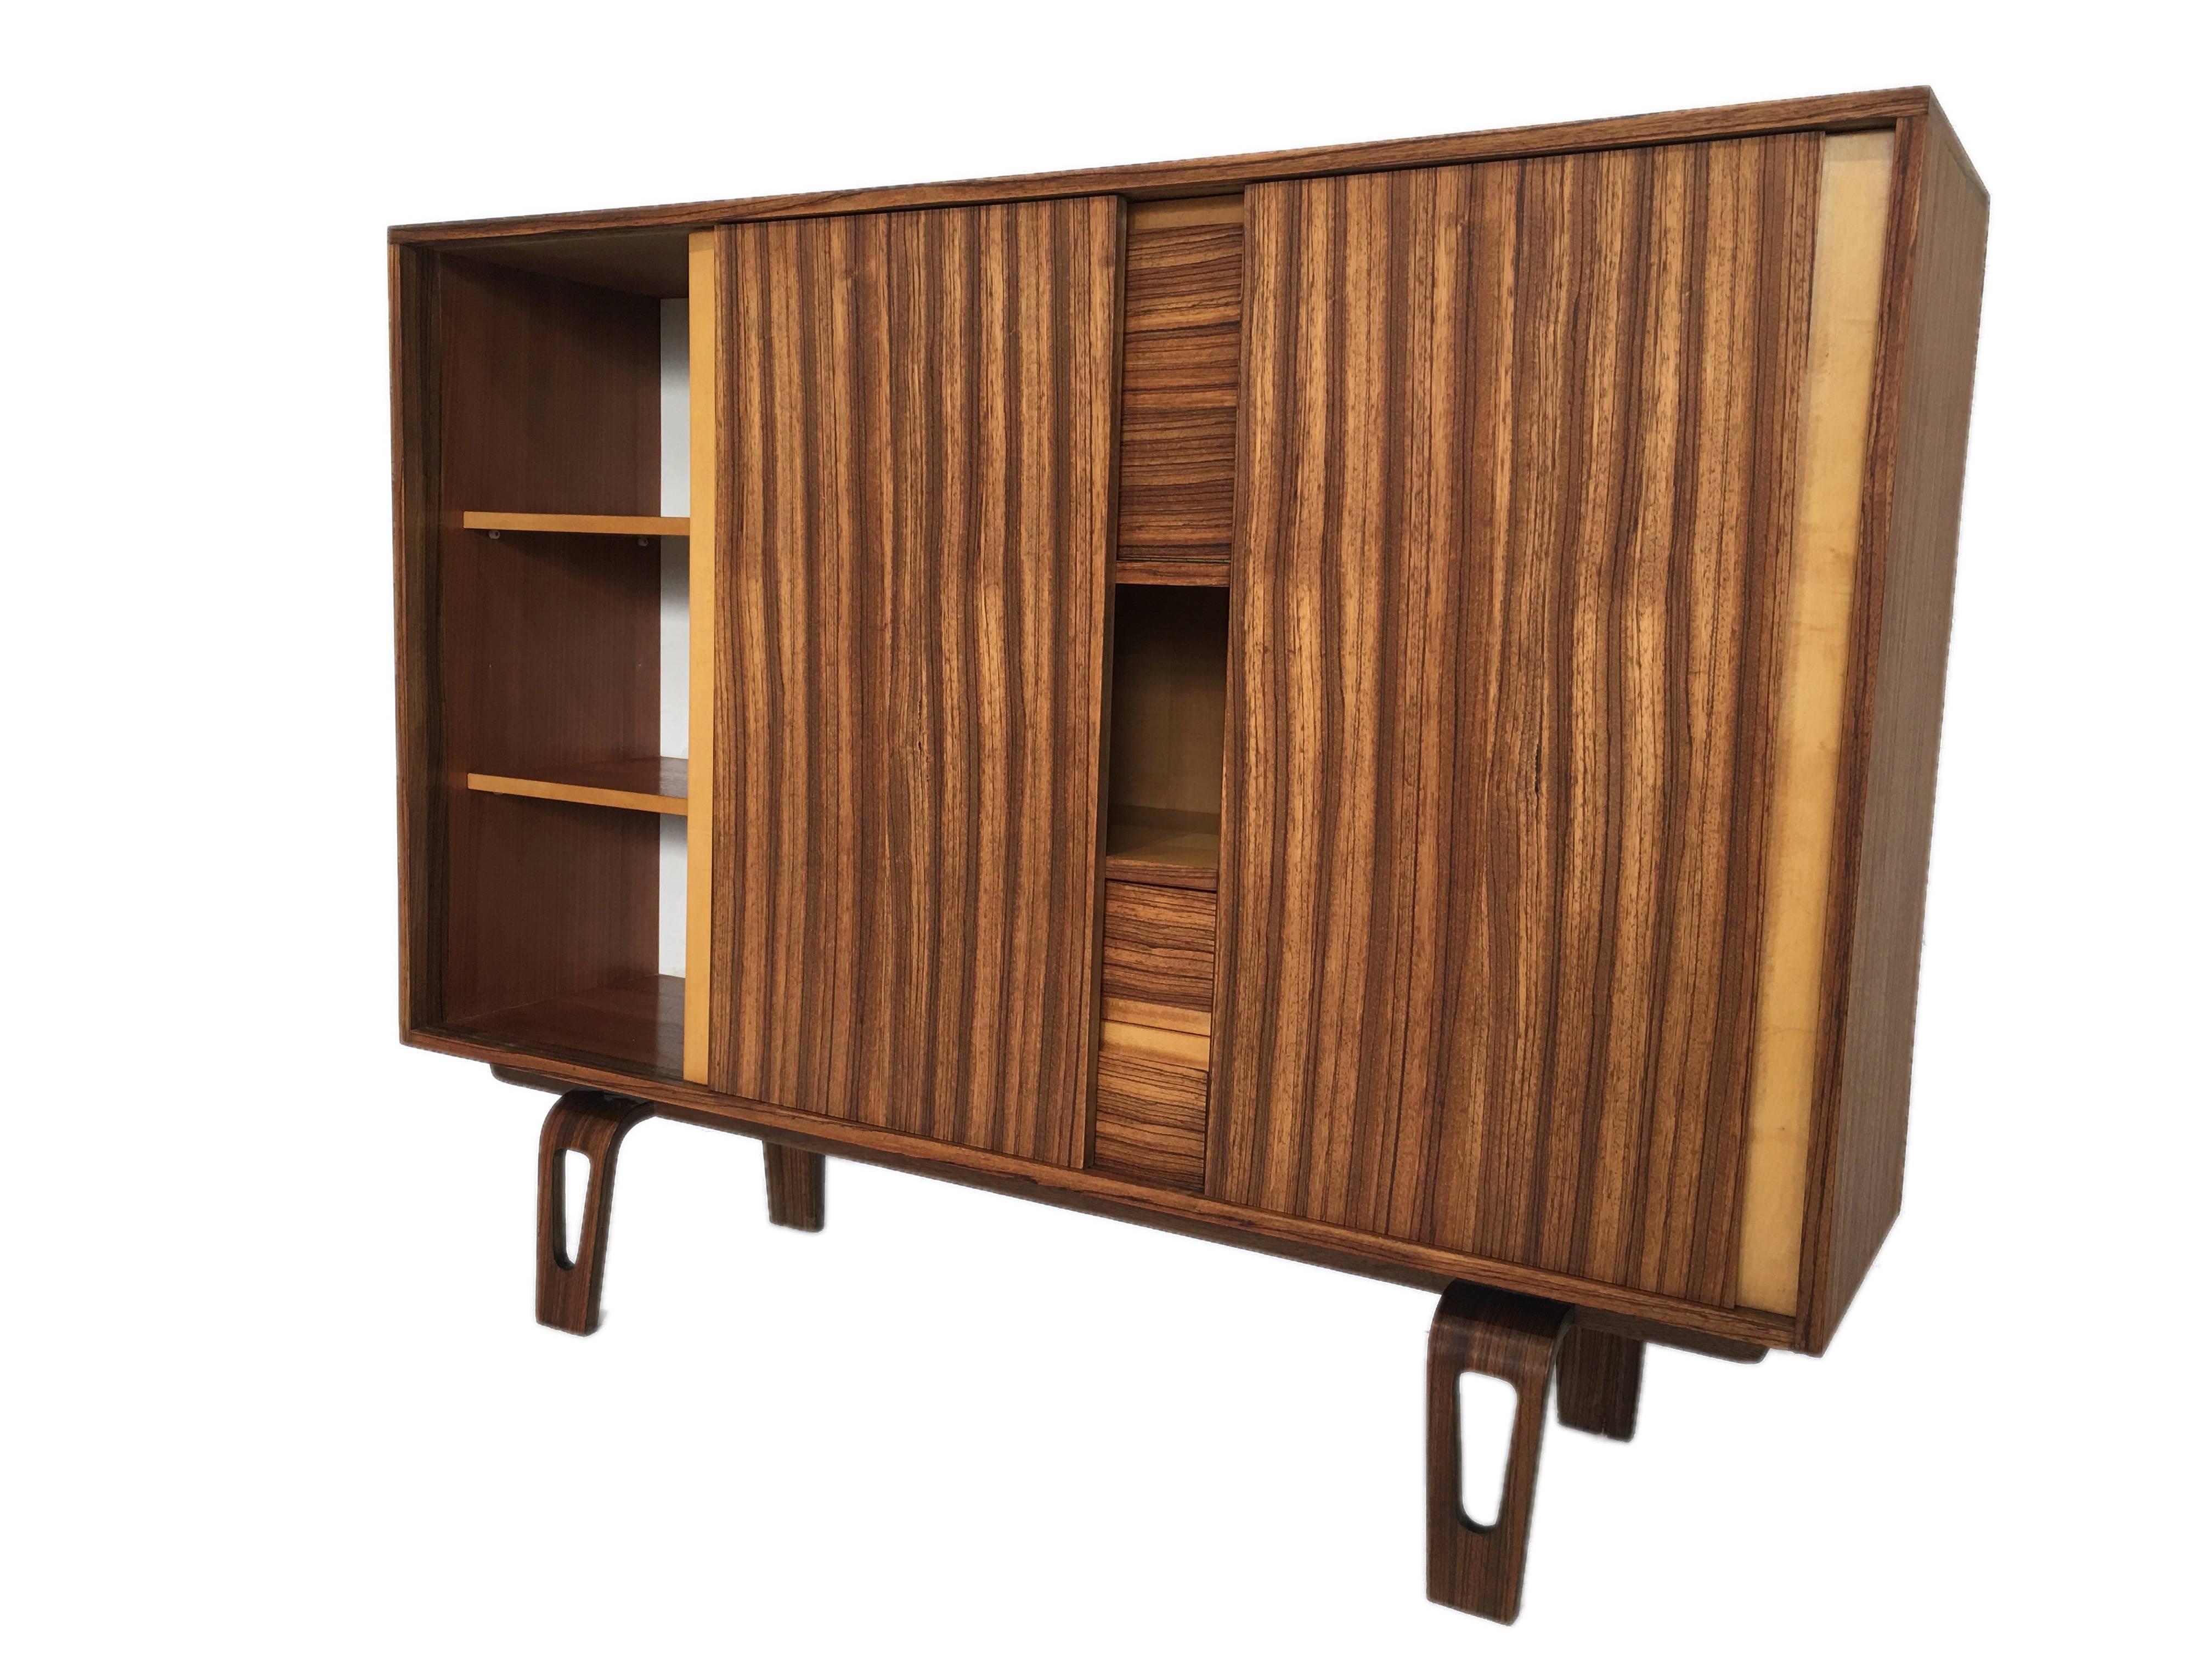 Cor Alons high board cabinet for Den Boer Gouda made in the 1950s.